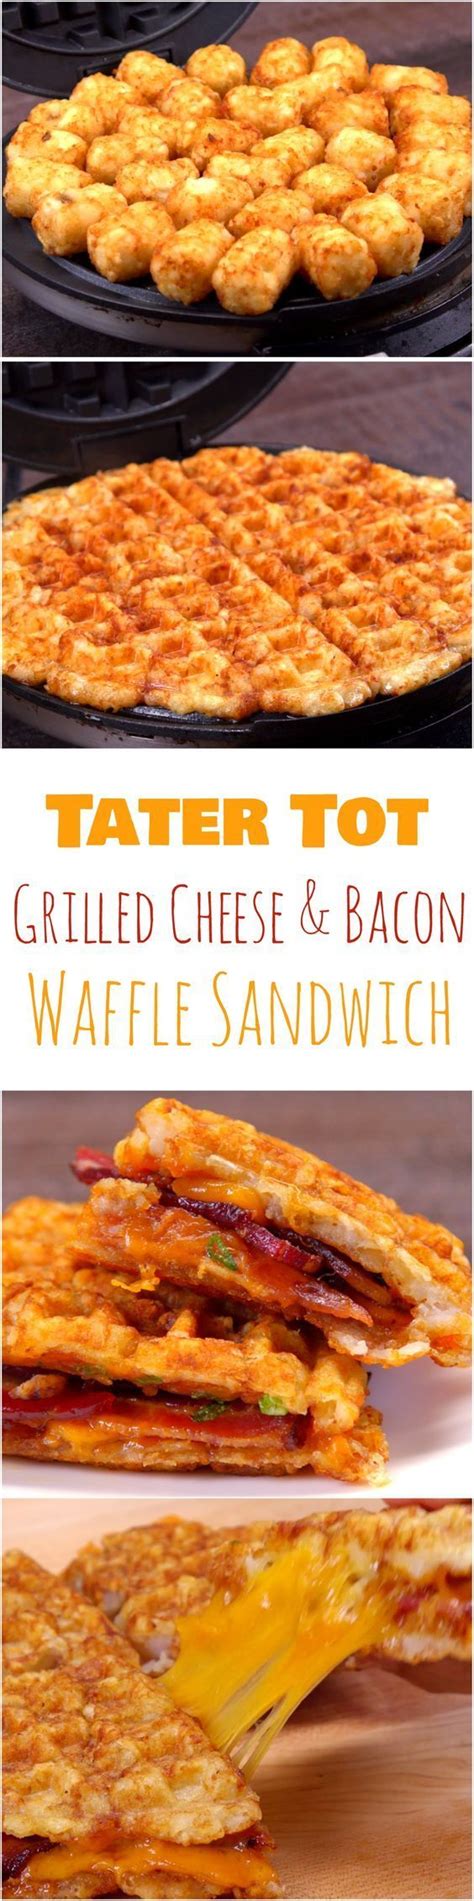 Tater Tot Grilled Cheese And Bacon Waffle Sandwich Recipe Food Bacon